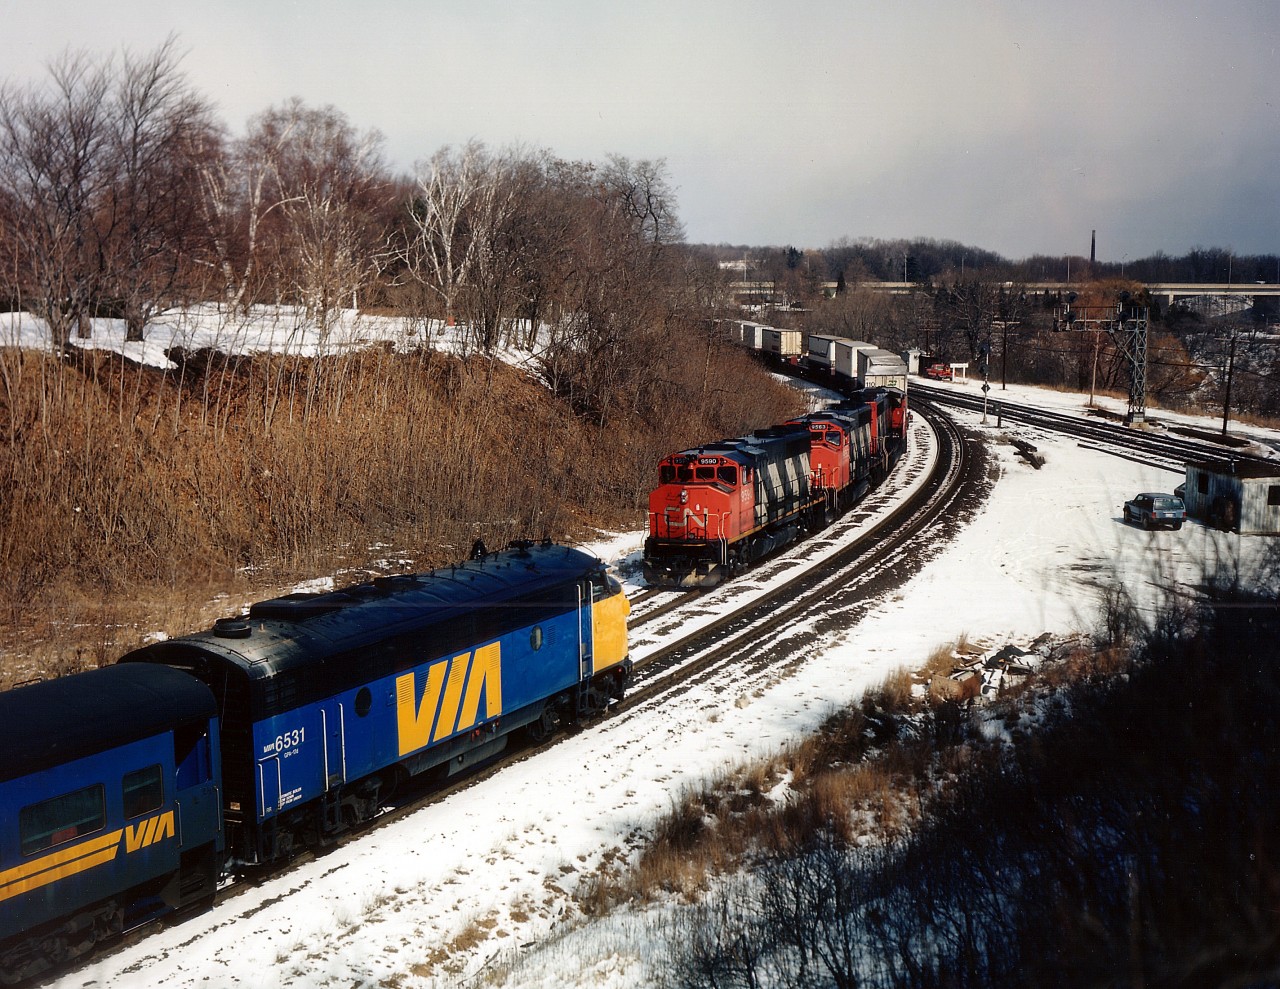 Rather fortunate while waiting for a non-descript westbound CN to have eastbound VIA #72 with a very clean 6531 on the nose pass below me for a good 'meet' image. The westbound is a trio of Widecabs, common at the time, CN 9590, 9563 and 9510, train #425, according to my notes.  March 1st was a Wednesday, so it is quiet at the Junction; and the blue Jeep in the photo belongs to fellow rail enthusiast Pete Hoople.  This photo, as the last RP. upload taken at this location, was shot with colour sheet film, 4x5 inch neg., using an old Speed Graphic. Purchase, processing and an 8x10 image printed would set me back $10+ PER shot, which is why I didn't shoot too many photographs with this format.